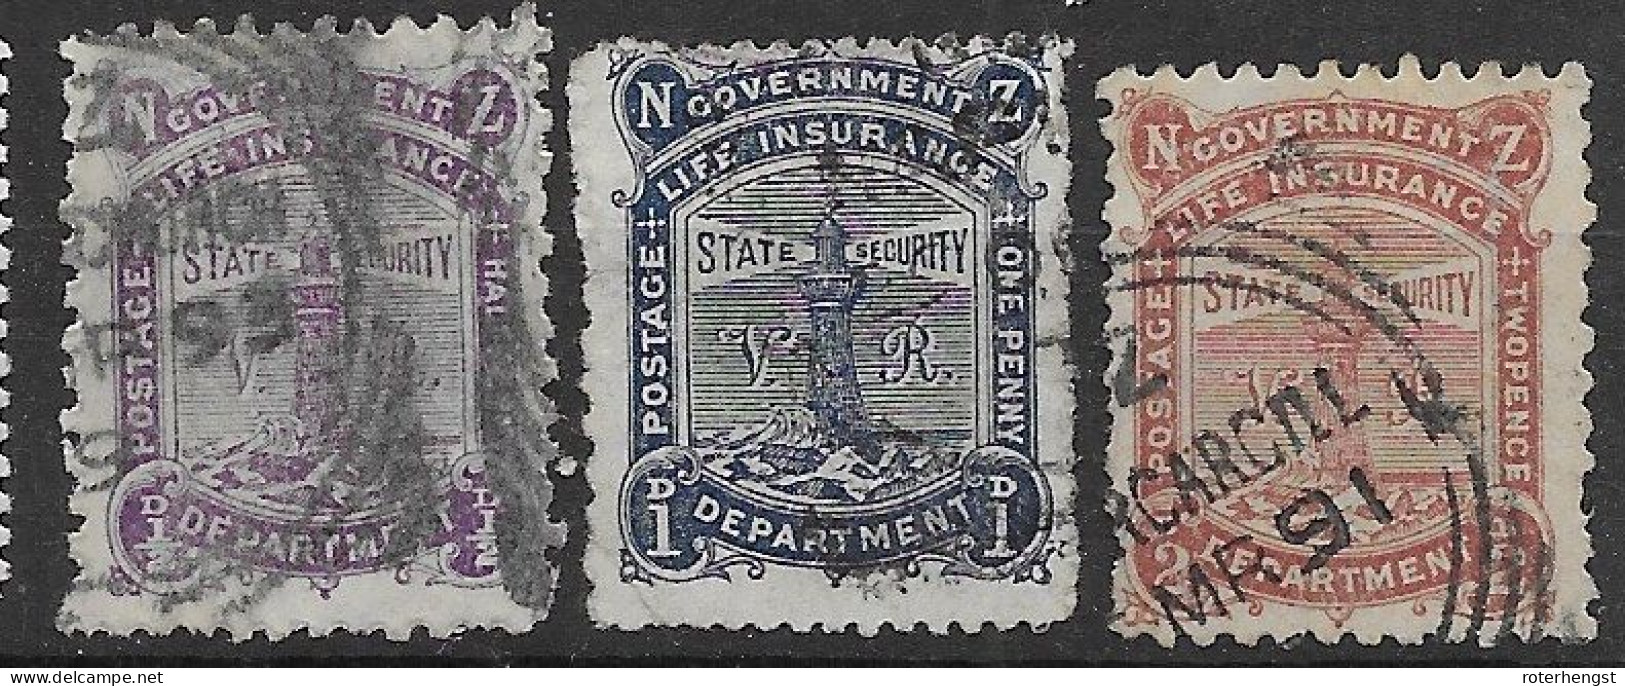 NZ Vfu 1902 Complete Lighthouse Set Better Perf 14:11 For The Blue Stamp 32 Euros - Service